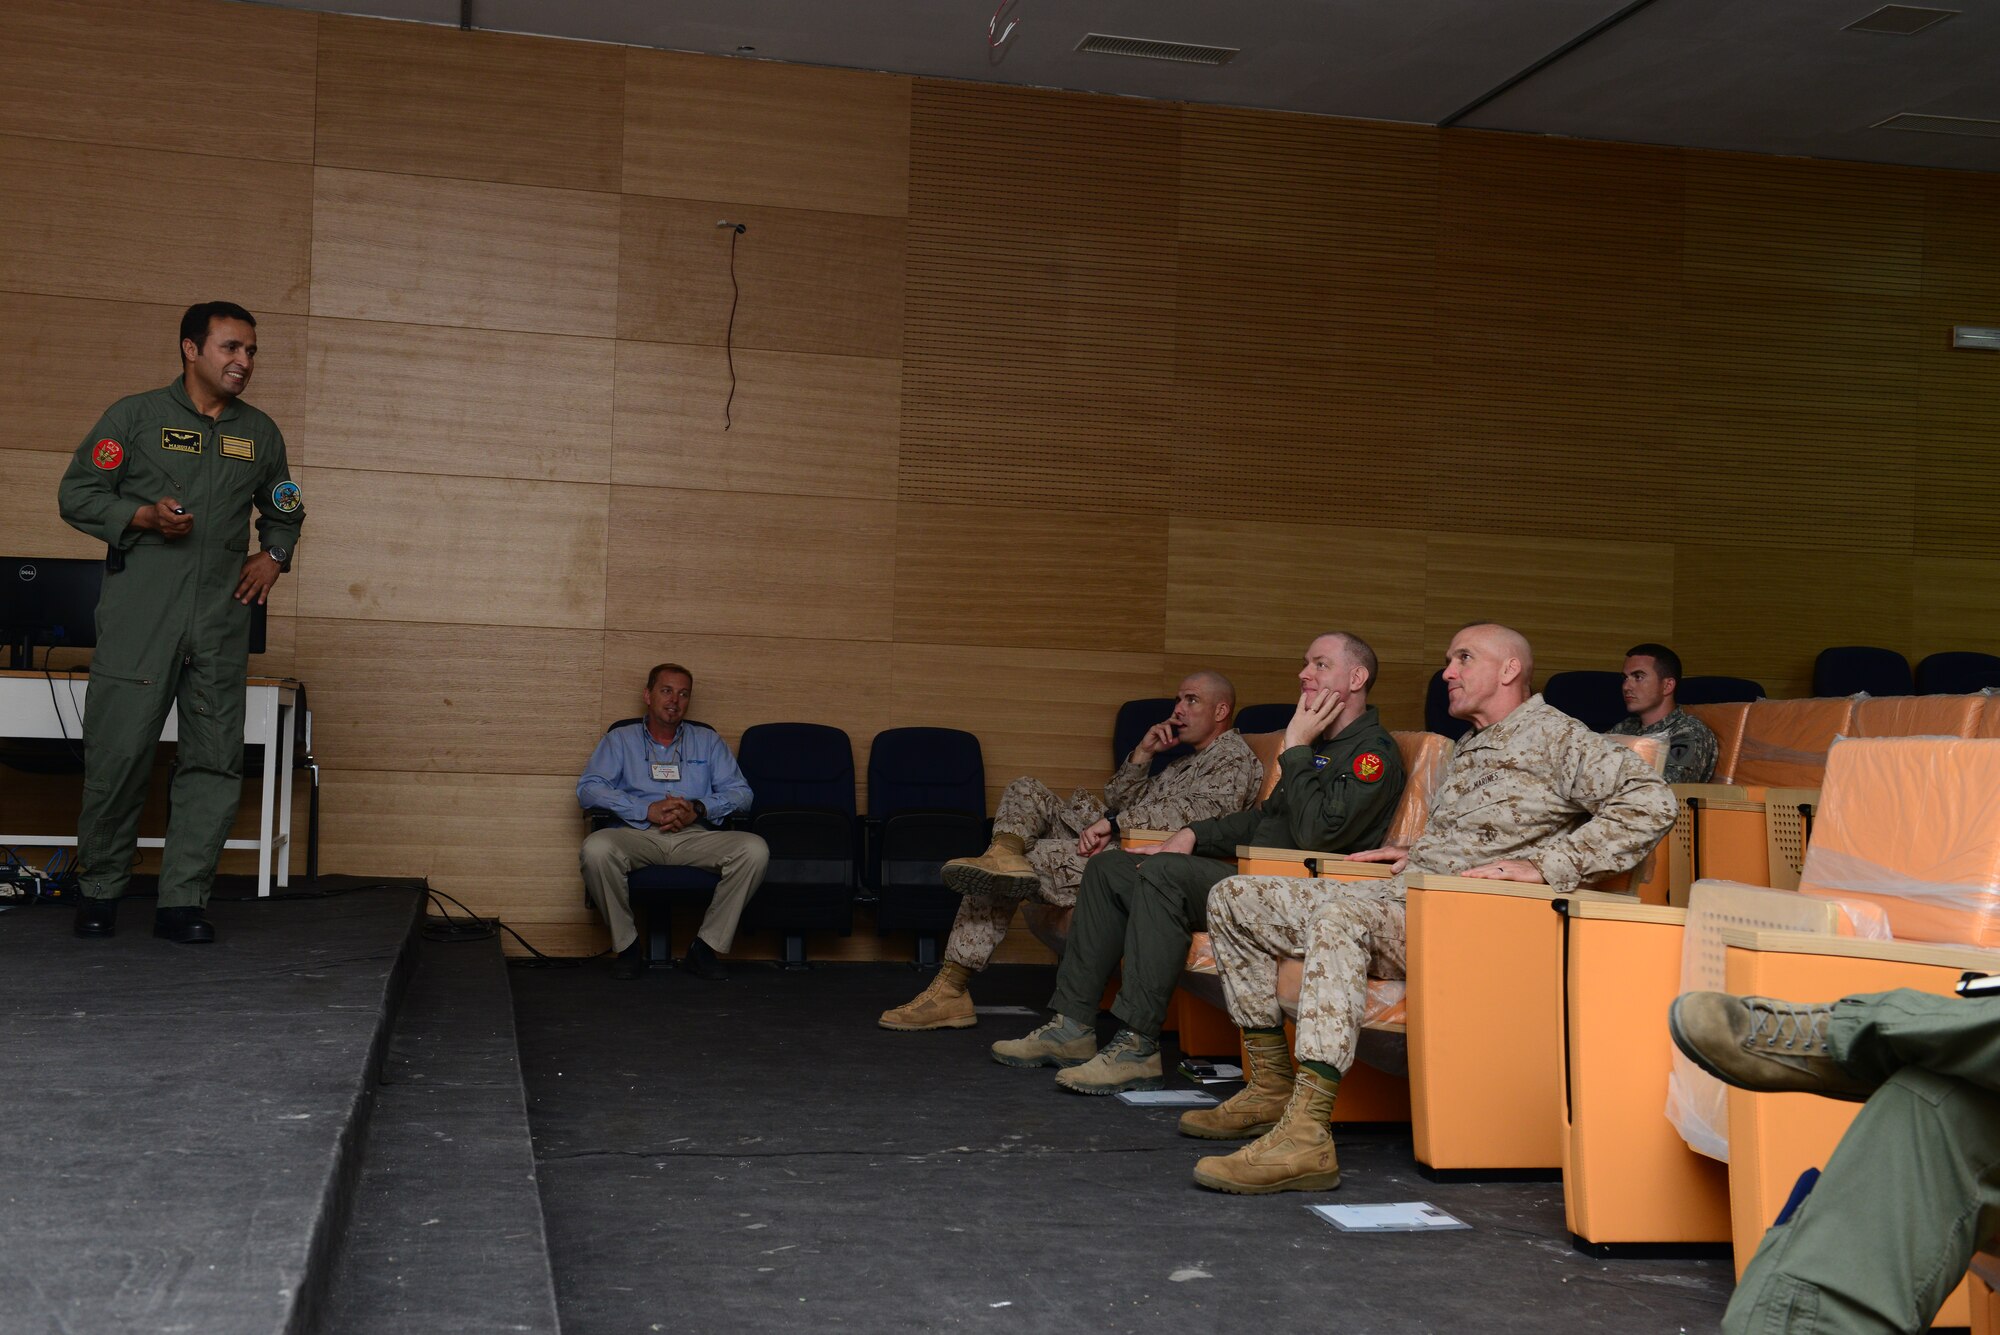 A Royal Moroccan Air Force pilot brief Maj. Gen. Richard Simcock, Exercise African Lion 15 Joint Task Force commander, and staff during a tour at Ben Guerir Air Base, Morocco, May 19, 2015. Simcock visited Ben Guerir to assess the air component of Exercise African Lion in addition to five other sites throughout Africa. African Lion is the largest Department of Defense exercise on the continent, with a vision to maximize interoperability with partner nation militaries. (U.S. Air Force photo by Staff Sgt. Eboni Reams)